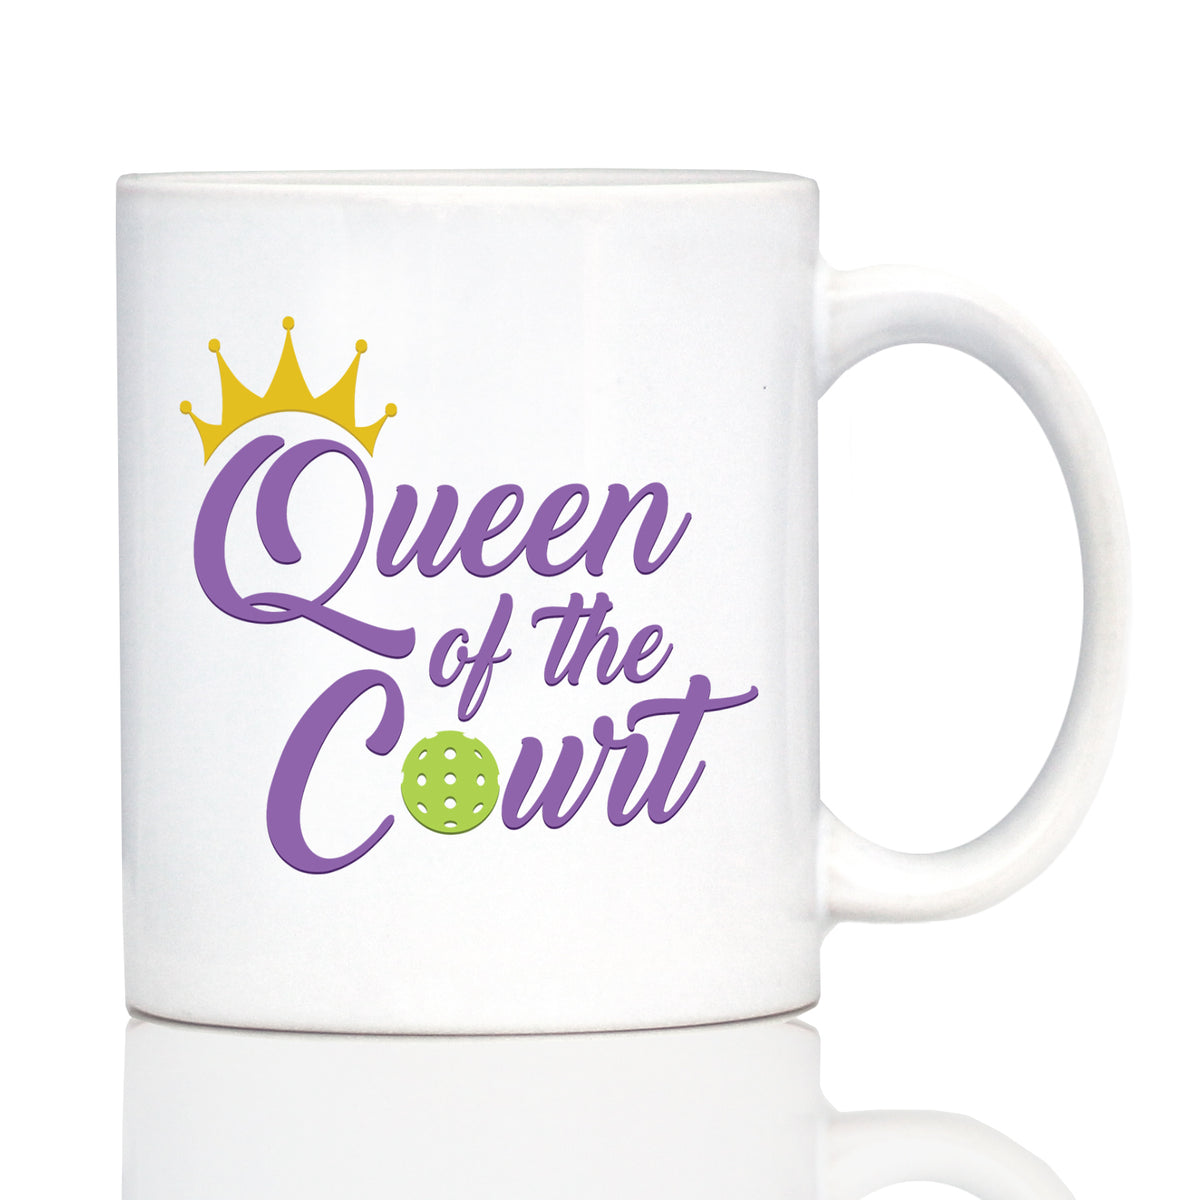 Queen of the Court Coffee Mug - Pickleball Gifts for Women - Pickleball Themed Decor